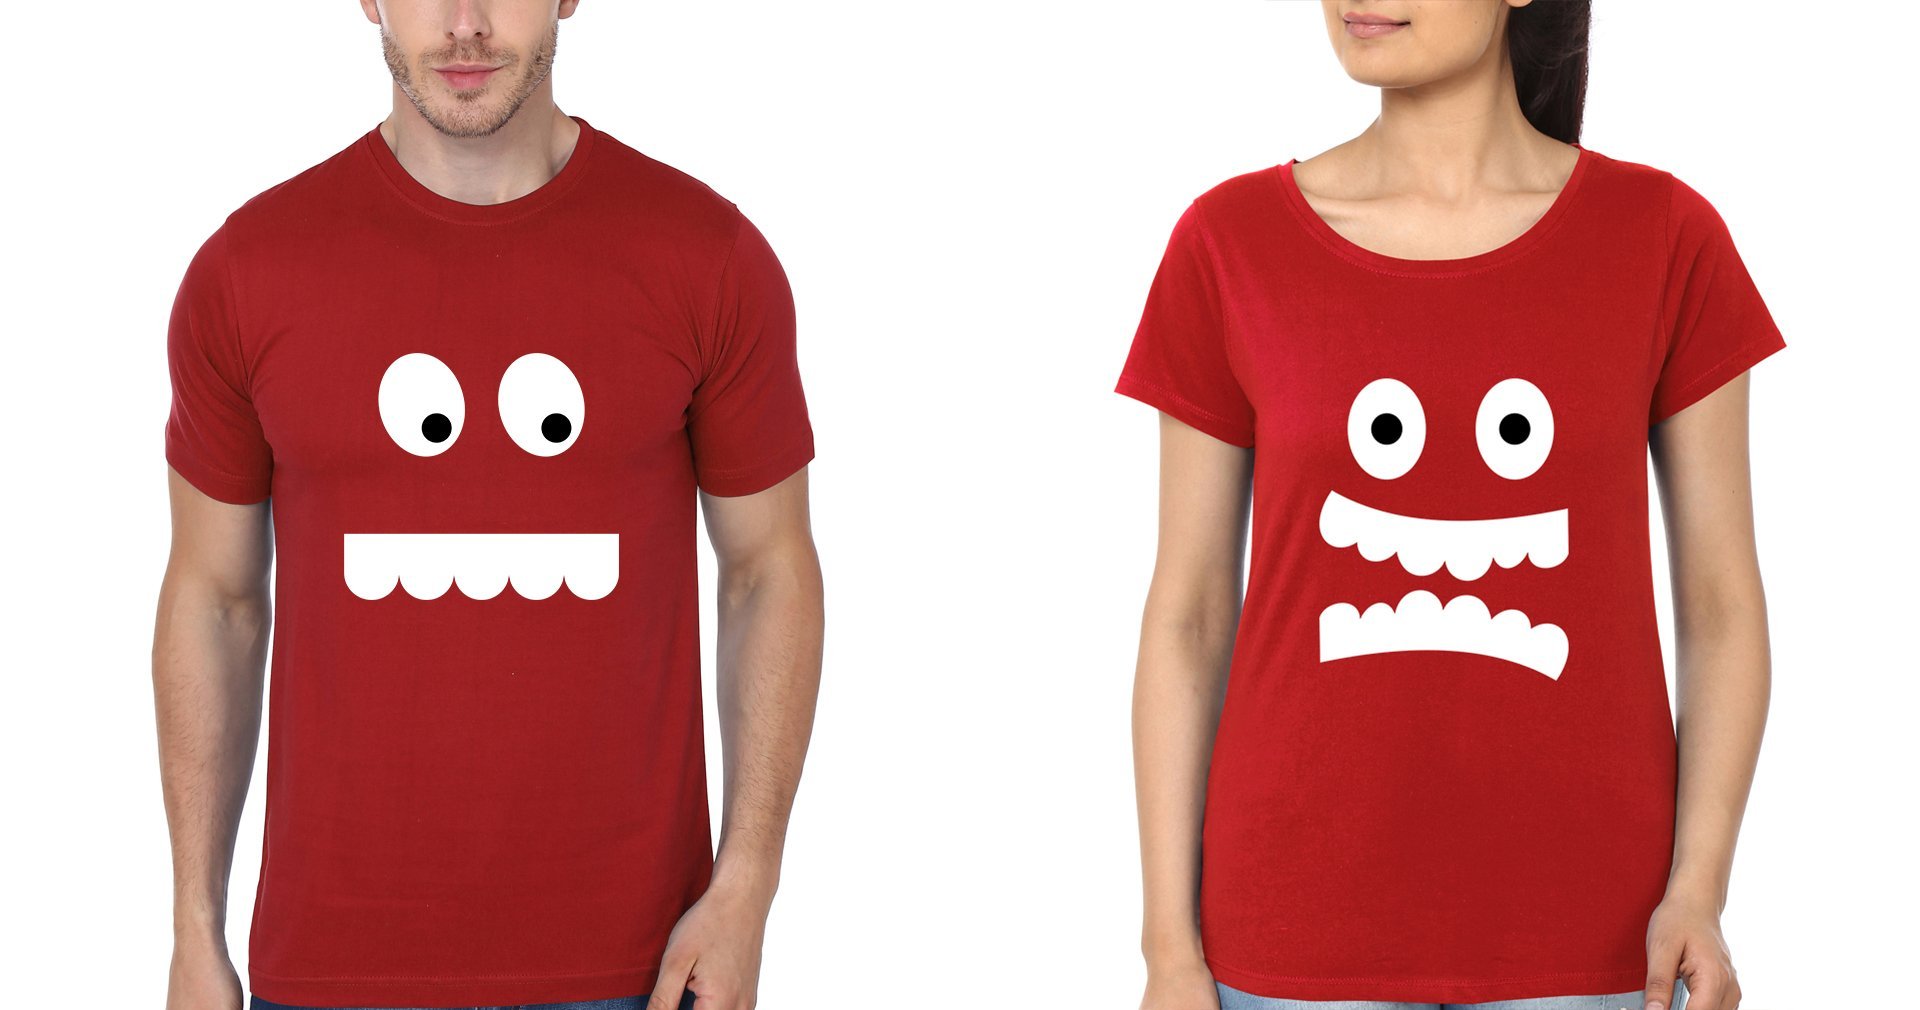 Eyes & Teeth Couple Half Sleeves T-Shirts -FunkyTradition - FunkyTradition